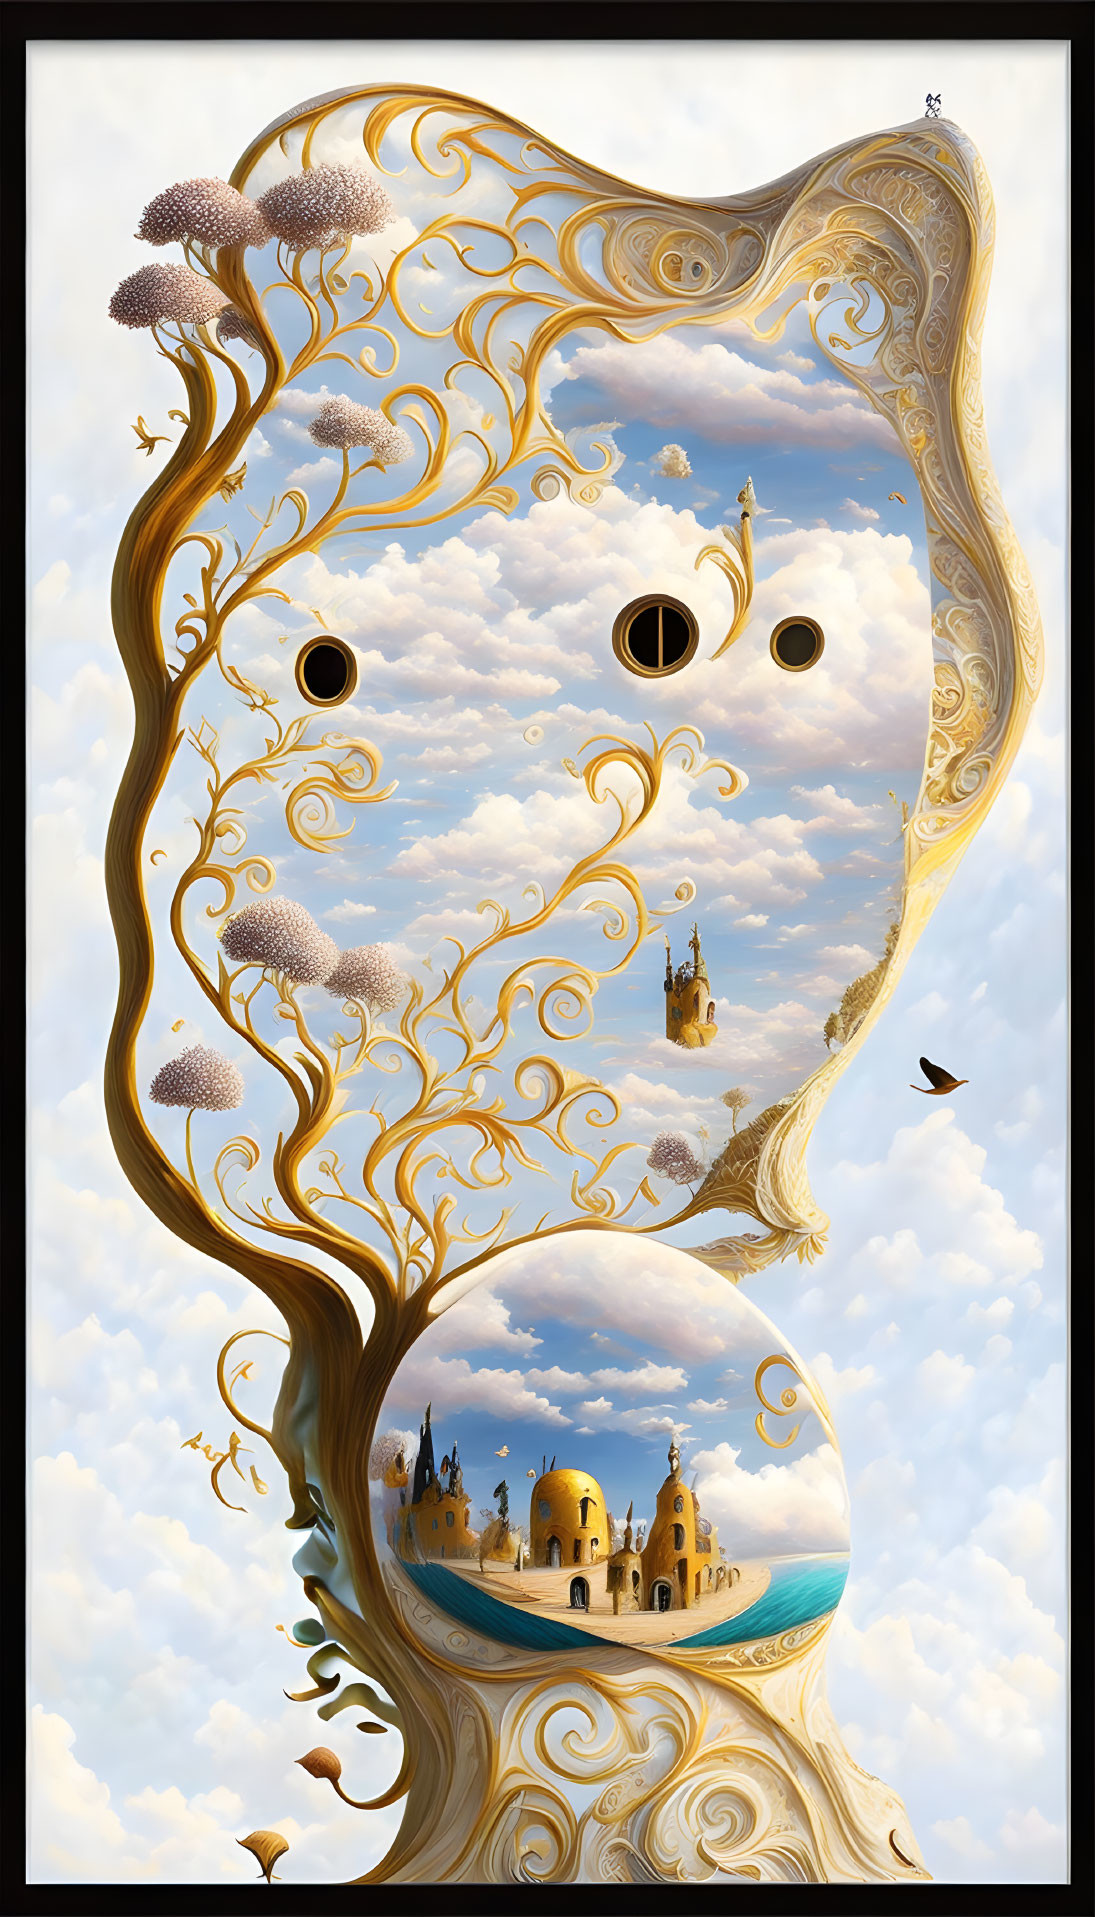 Surreal painting: swirling tree with eyes, castles, and floating islands